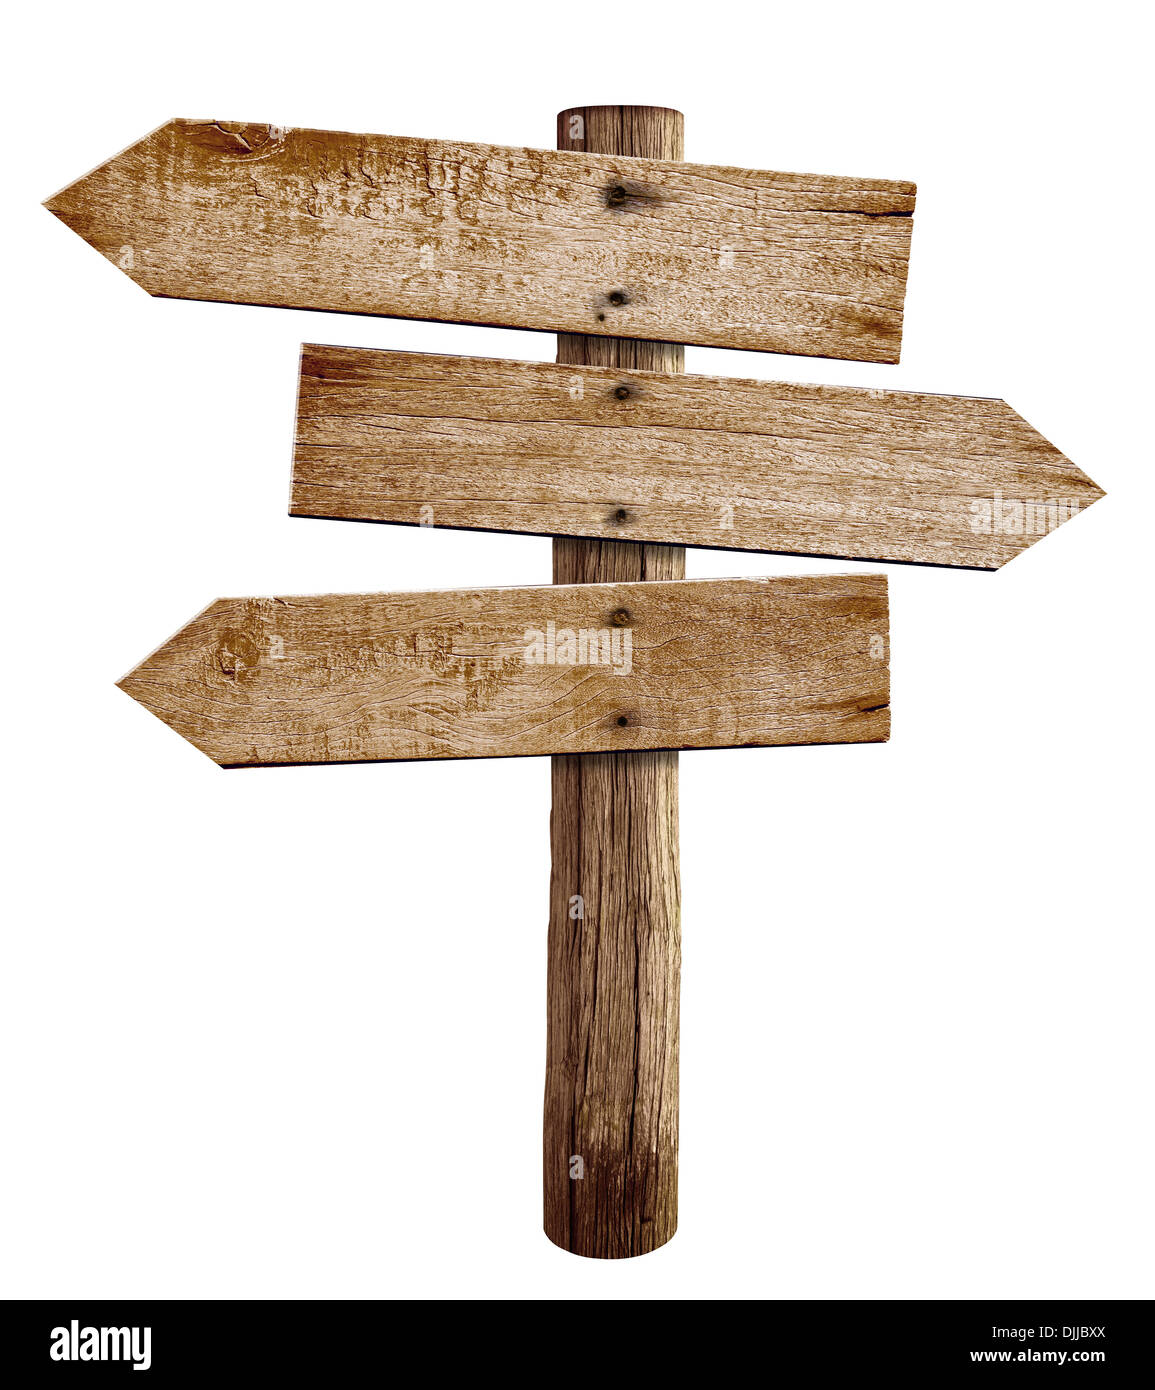 wooden arrow sign post or road signpost isolated Stock Photo